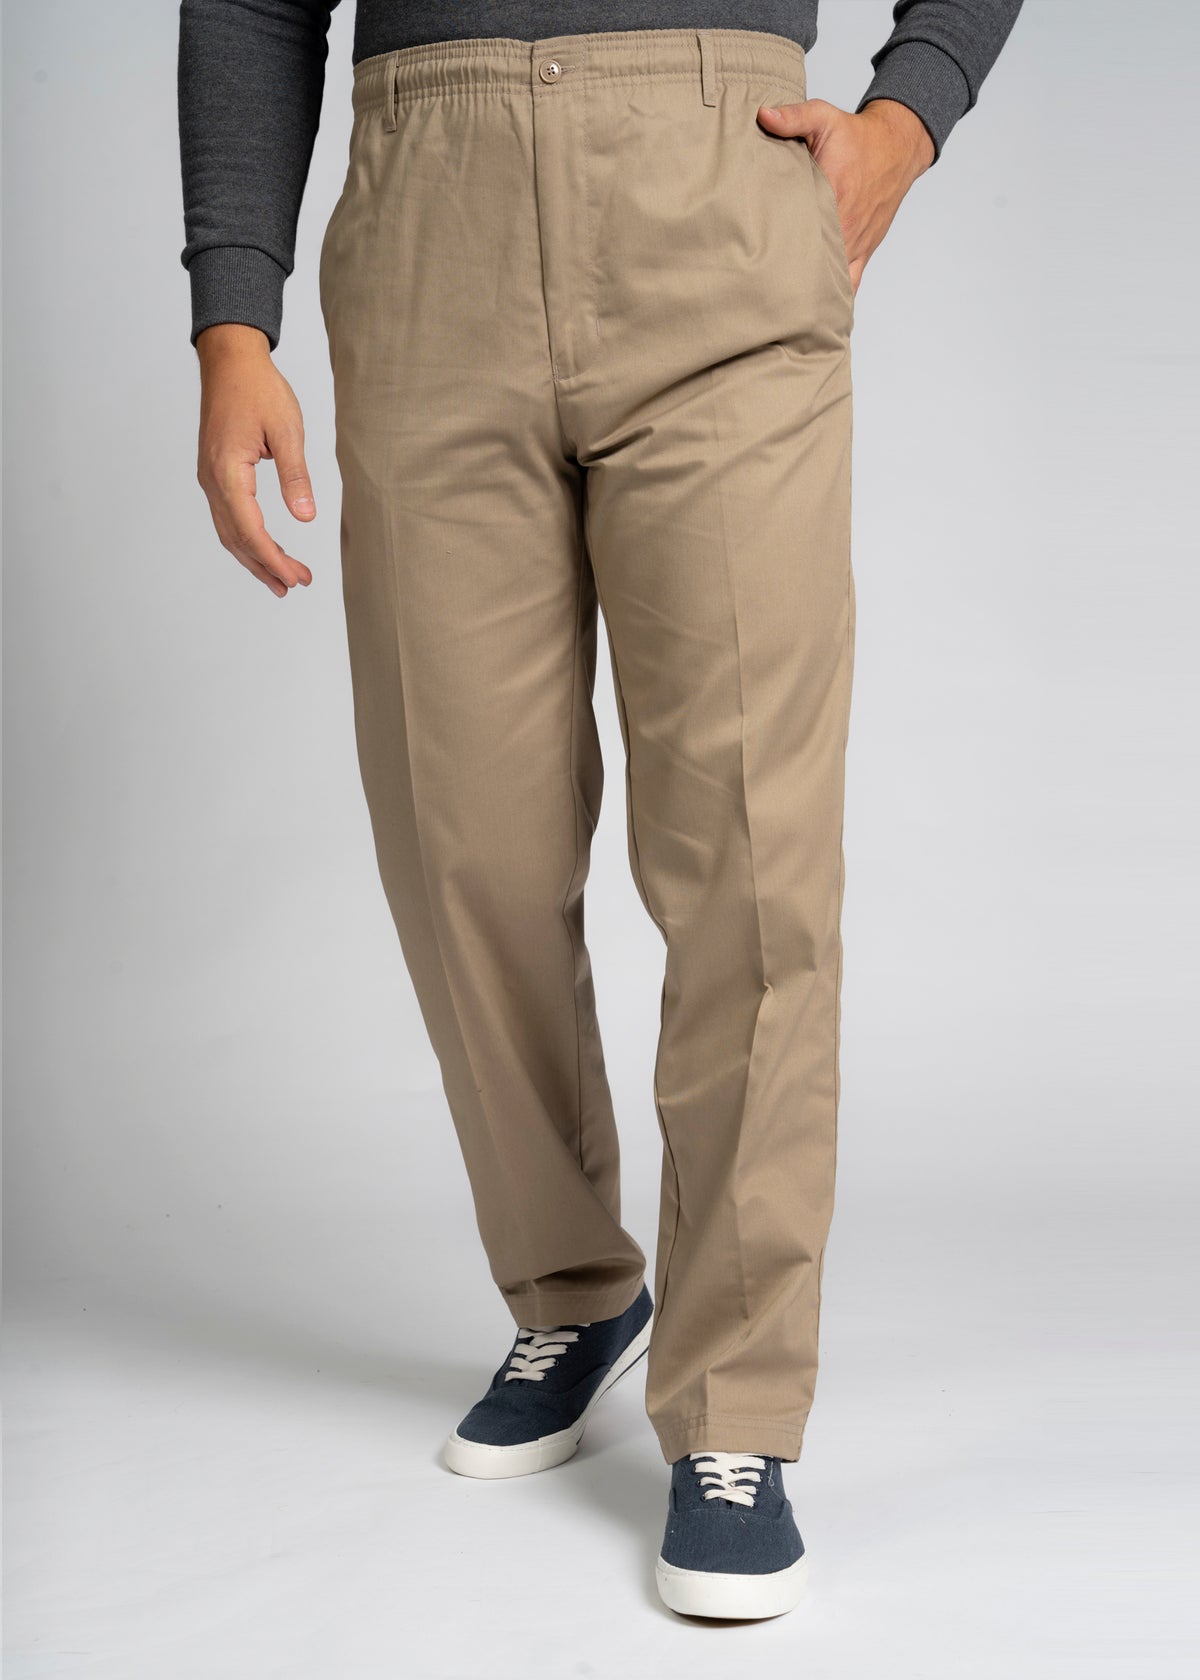 Mens Elasticated Waist Trousers For The Elderly  Able2 Wear